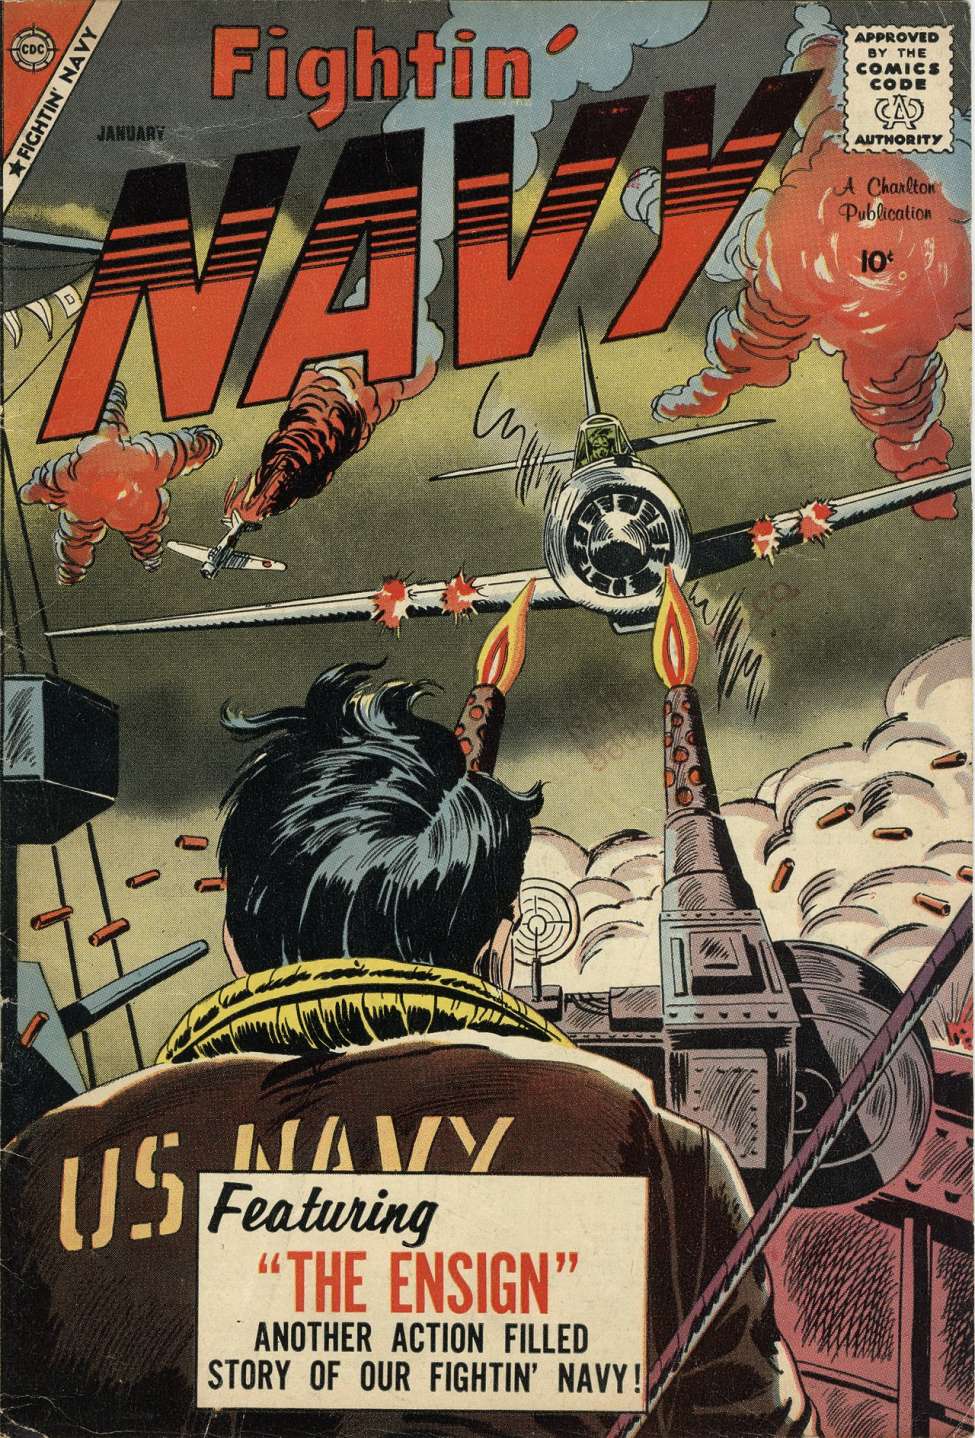 Book Cover For Fightin' Navy 85 - Version 2